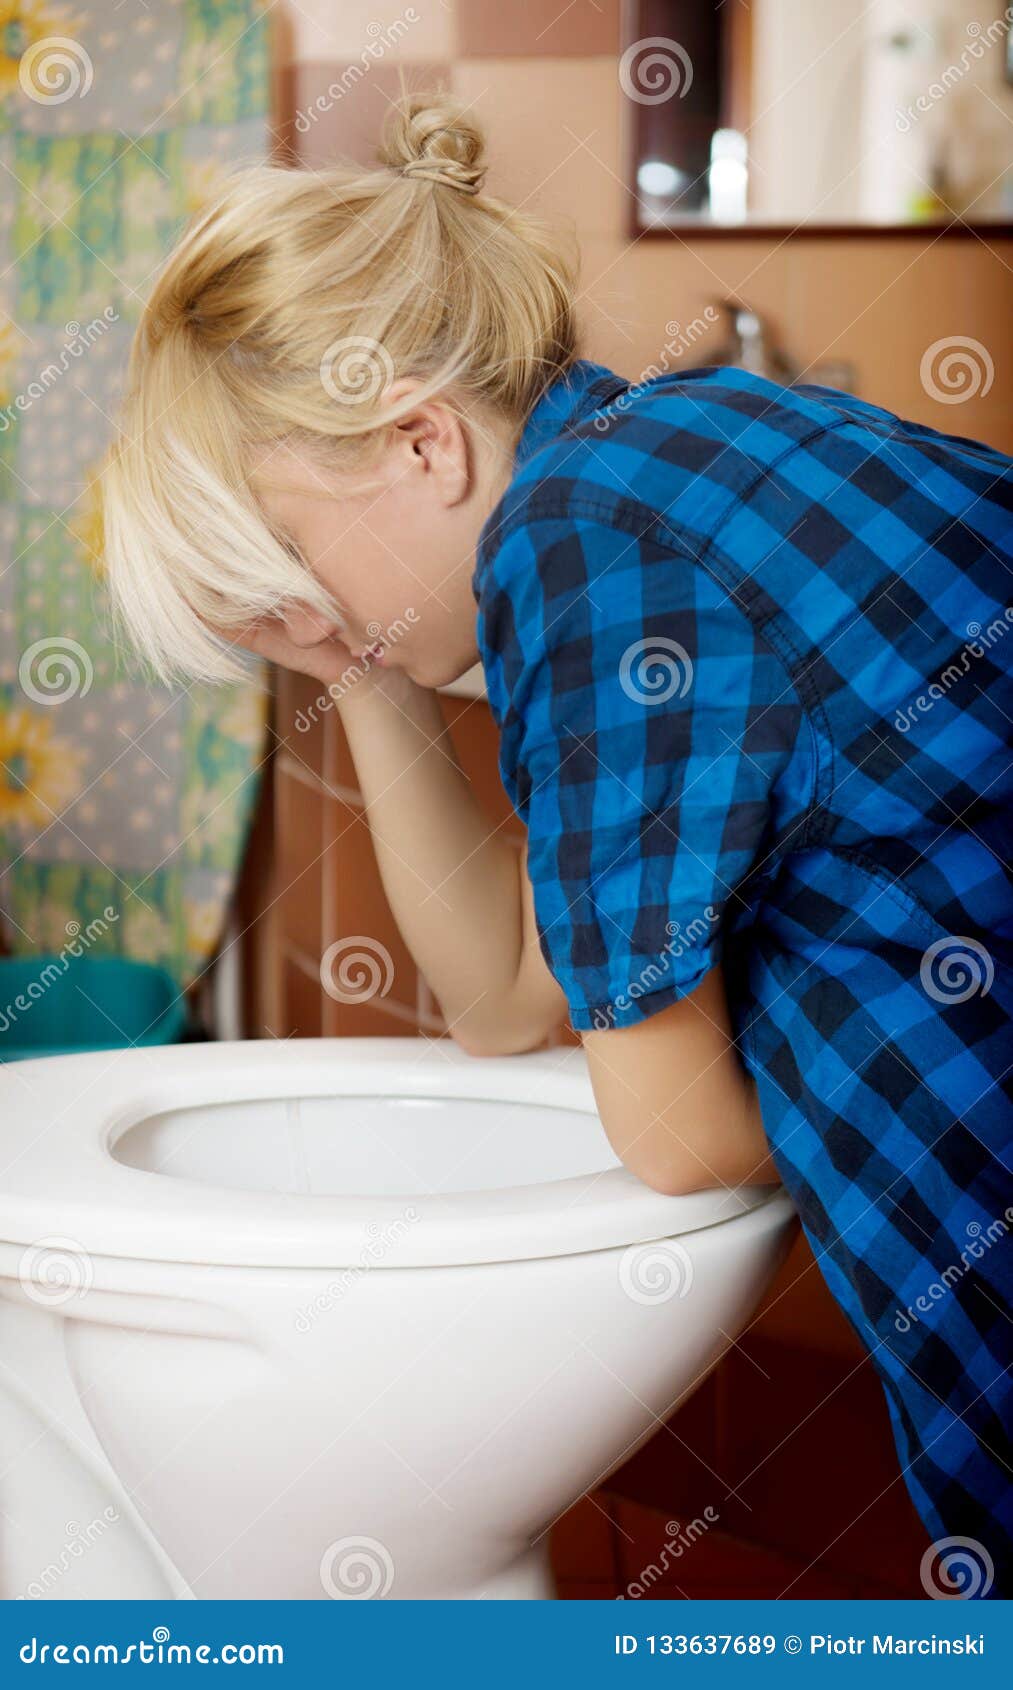 Sick Young Woman Leaning On Open Toilet Seat. Stock Photo 